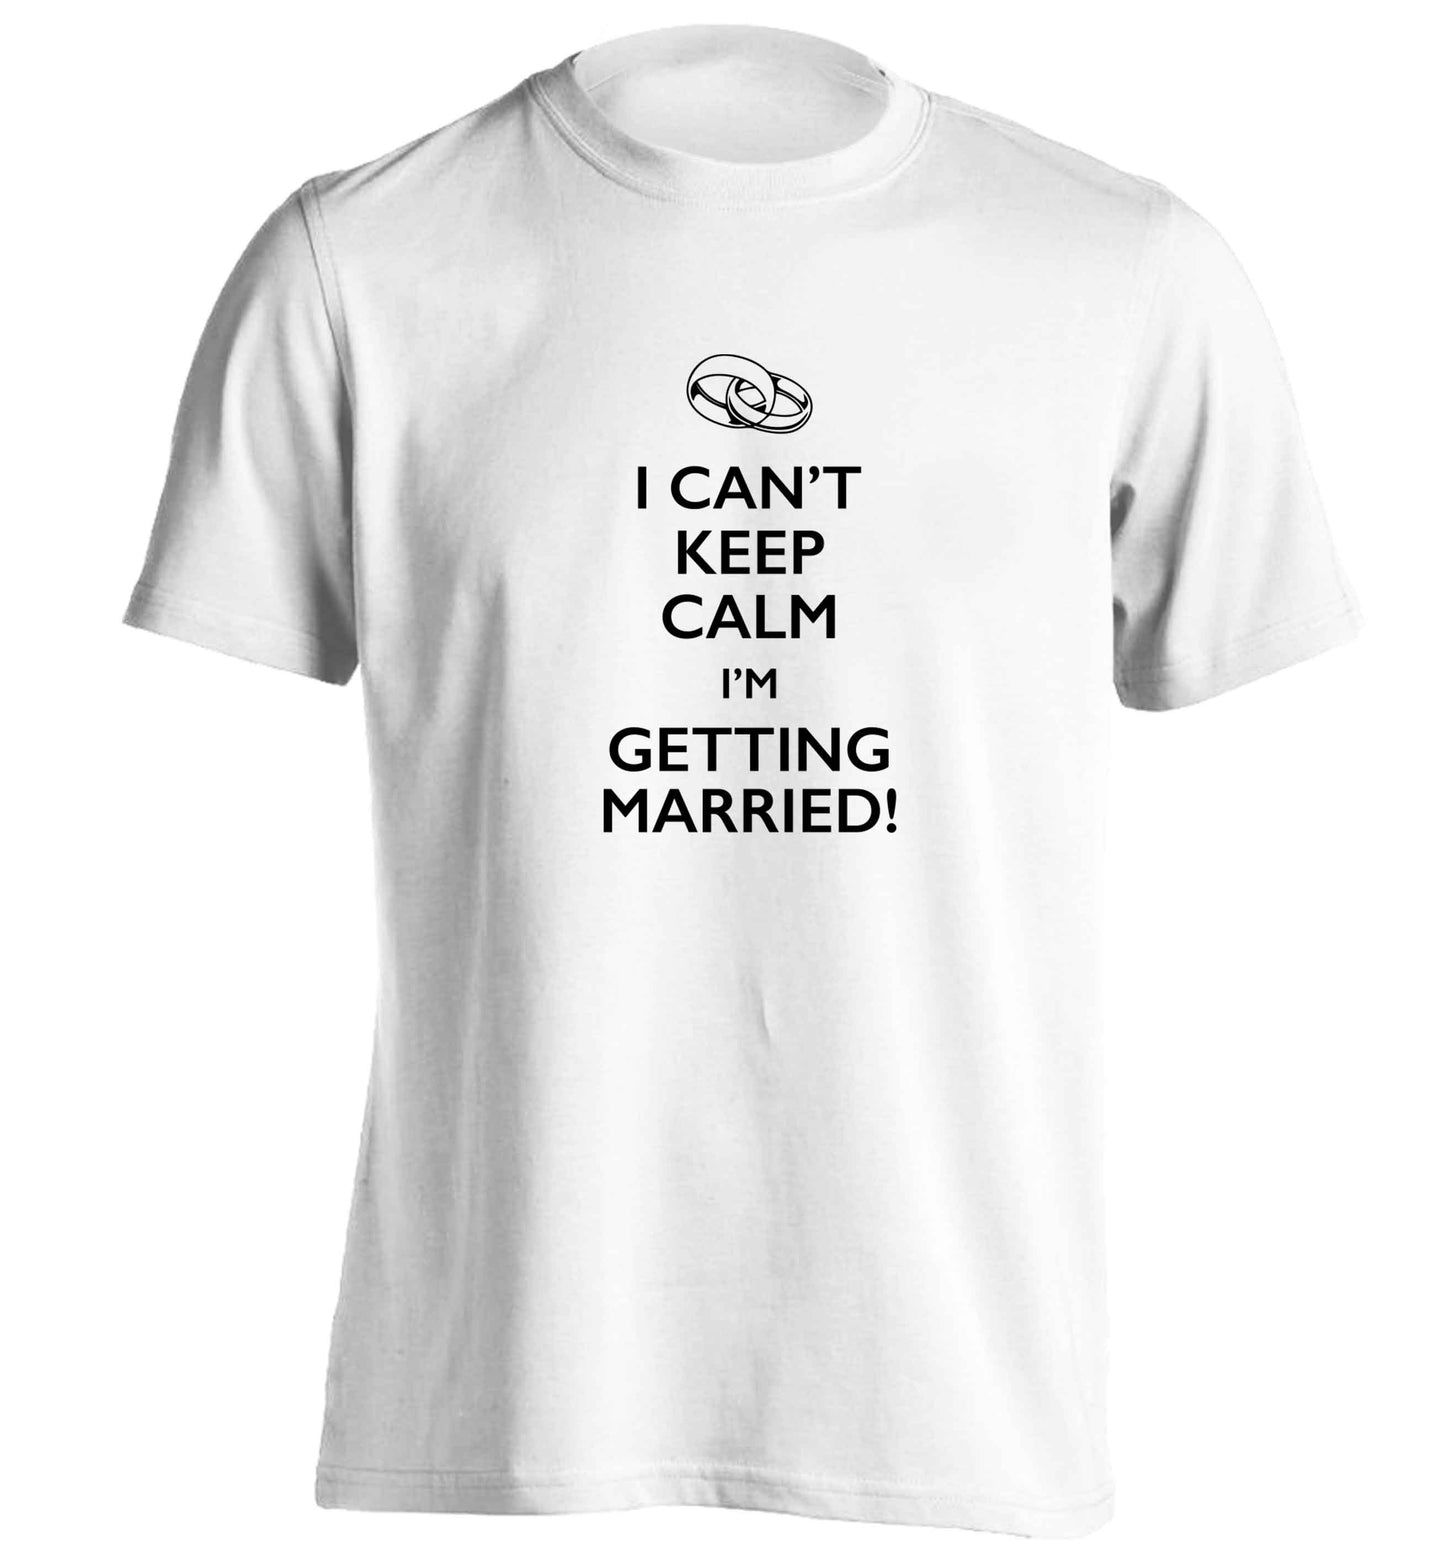 I can't keep calm I'm getting married! adults unisex white Tshirt 2XL